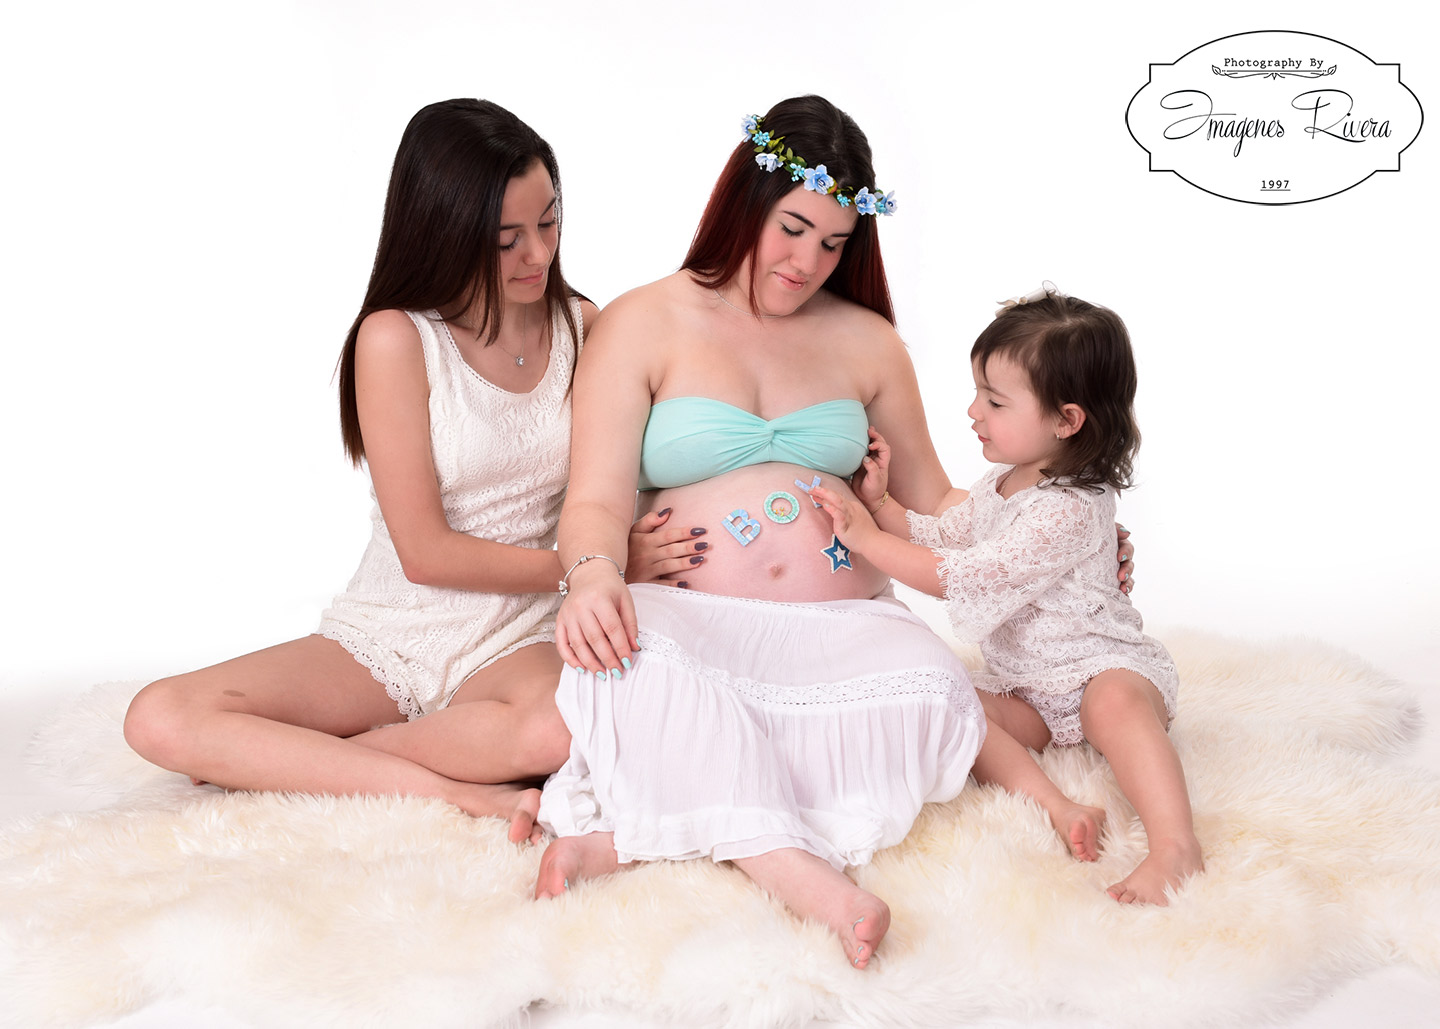 ♥ Maternity and family pictures in a Miami studio | Imagenes Rivera Maternity photographer ♥